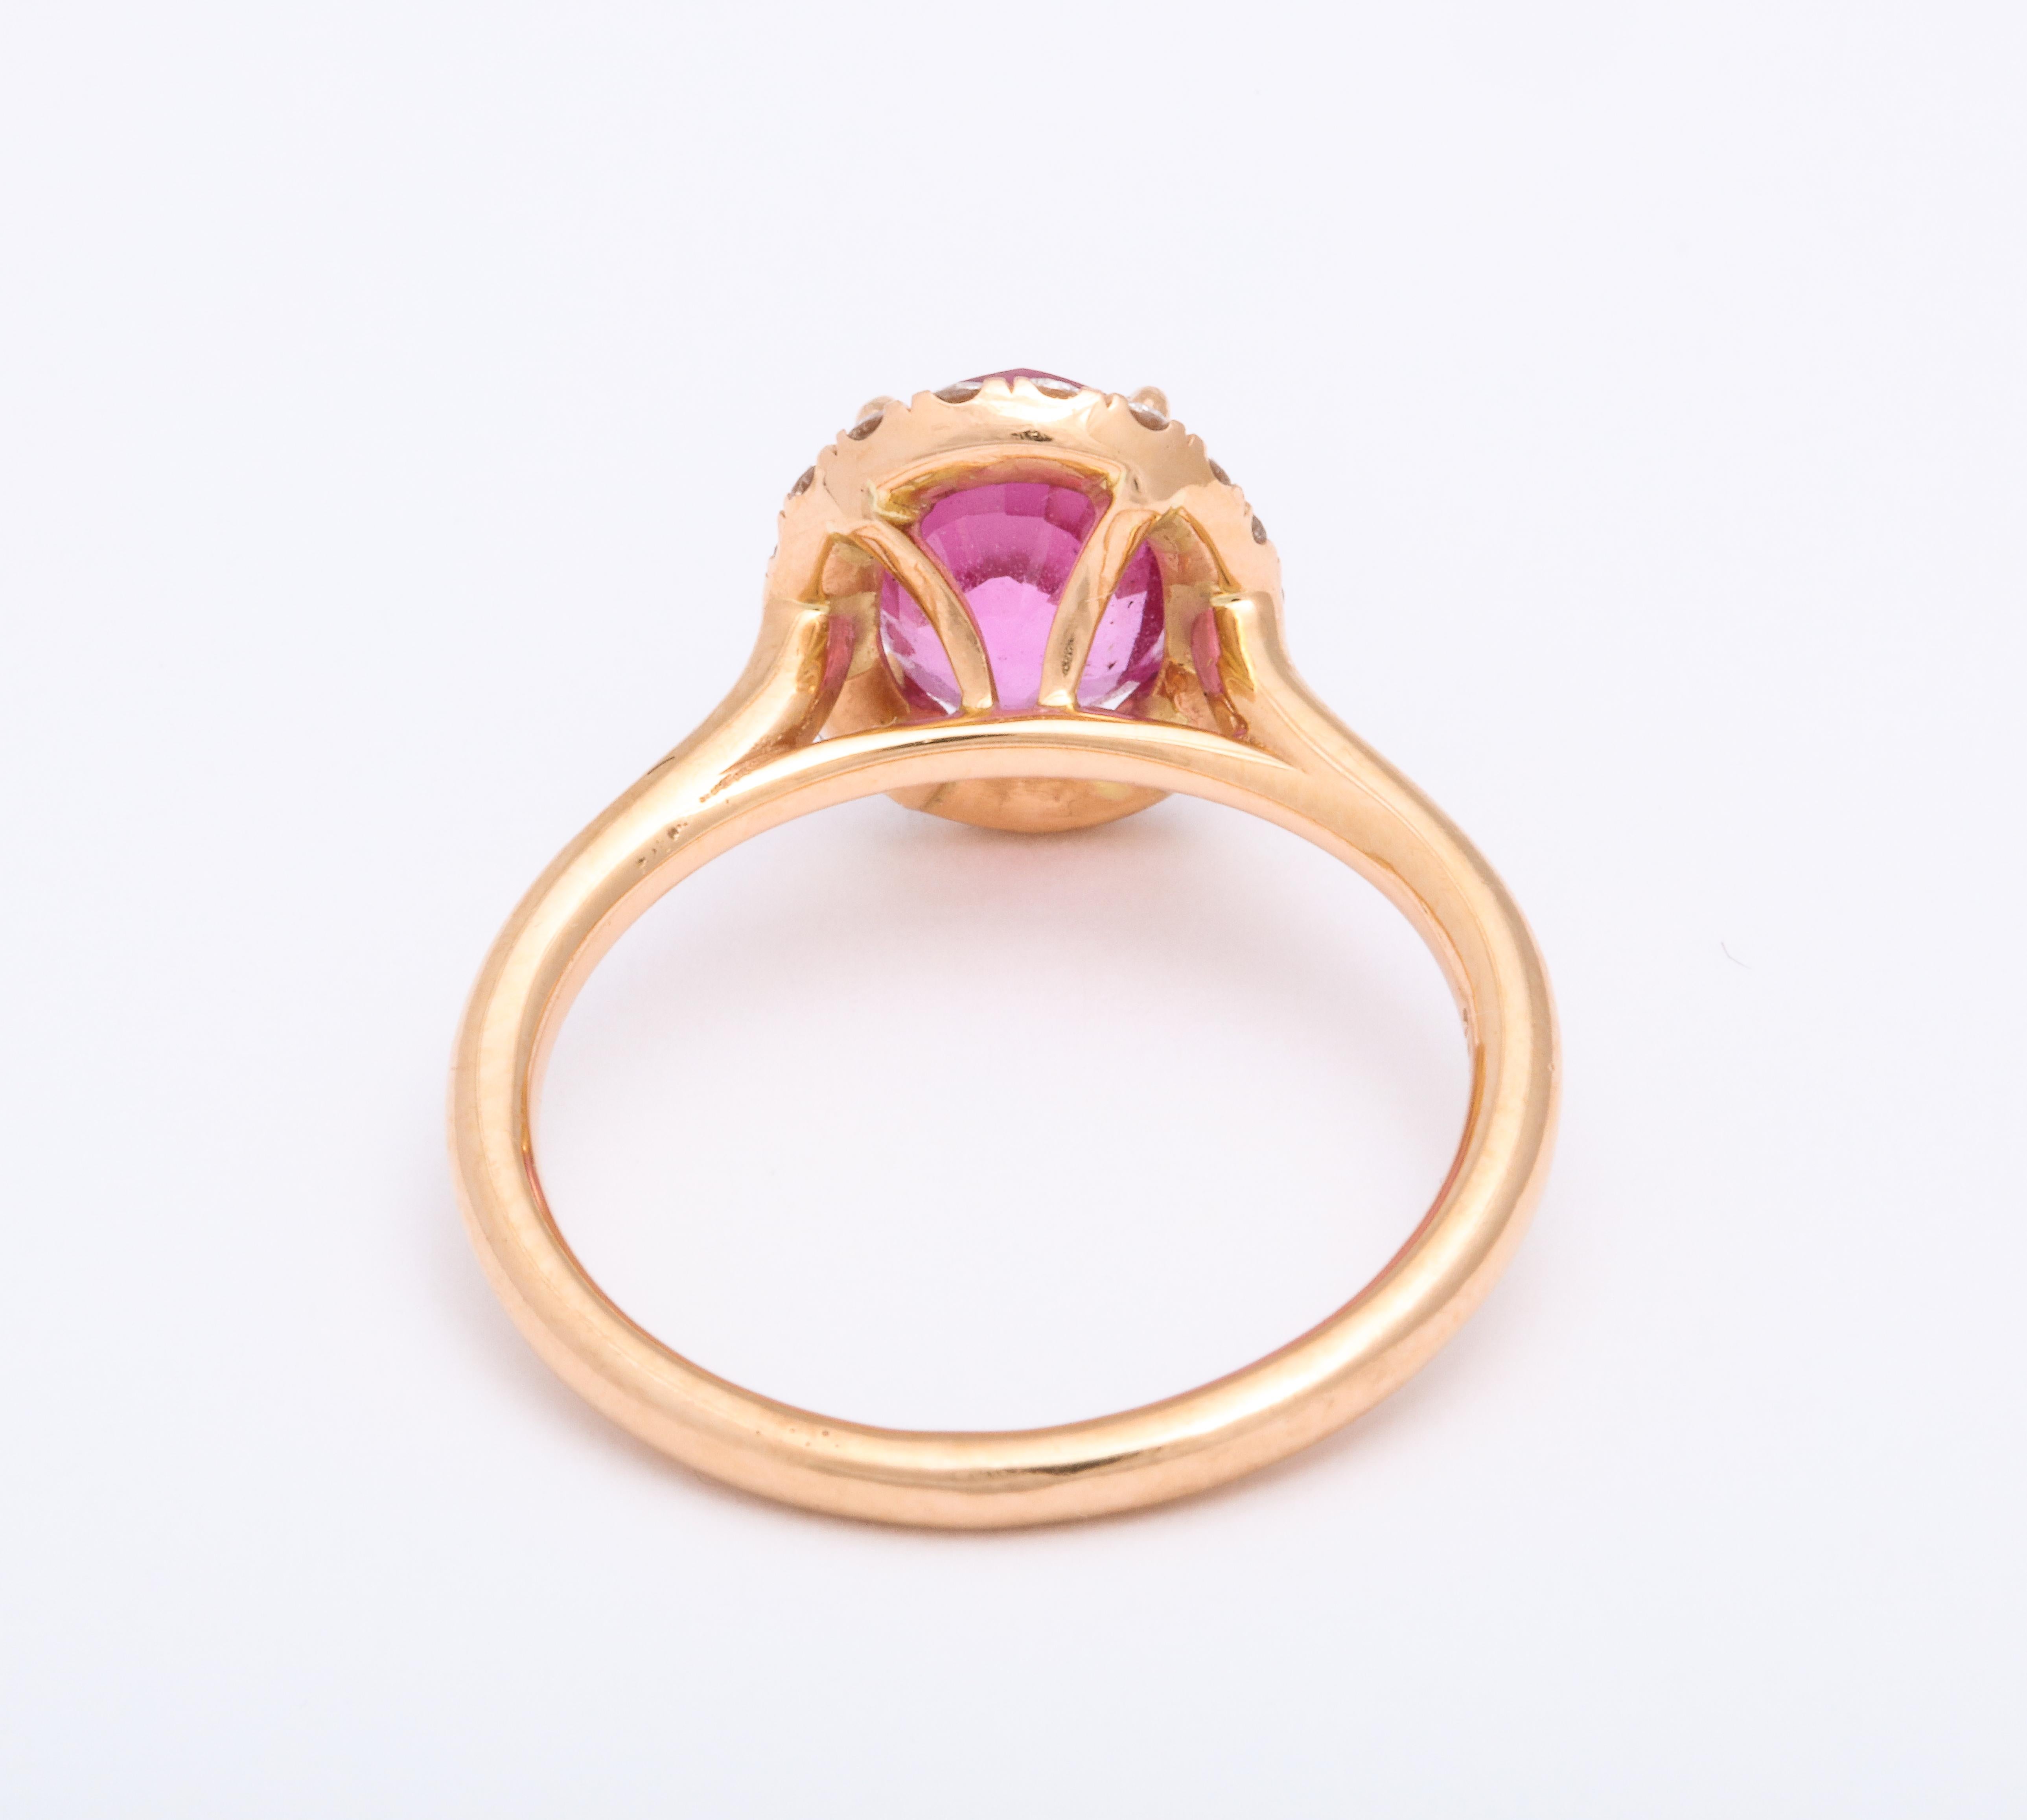 A ring set in 18 karat pink gold featuring a 2.24 carat oval vivid pink Madagascar sapphire. Surrounded by round brilliant diamonds with a total weight of 0.27 carats. Ring size 6. 
